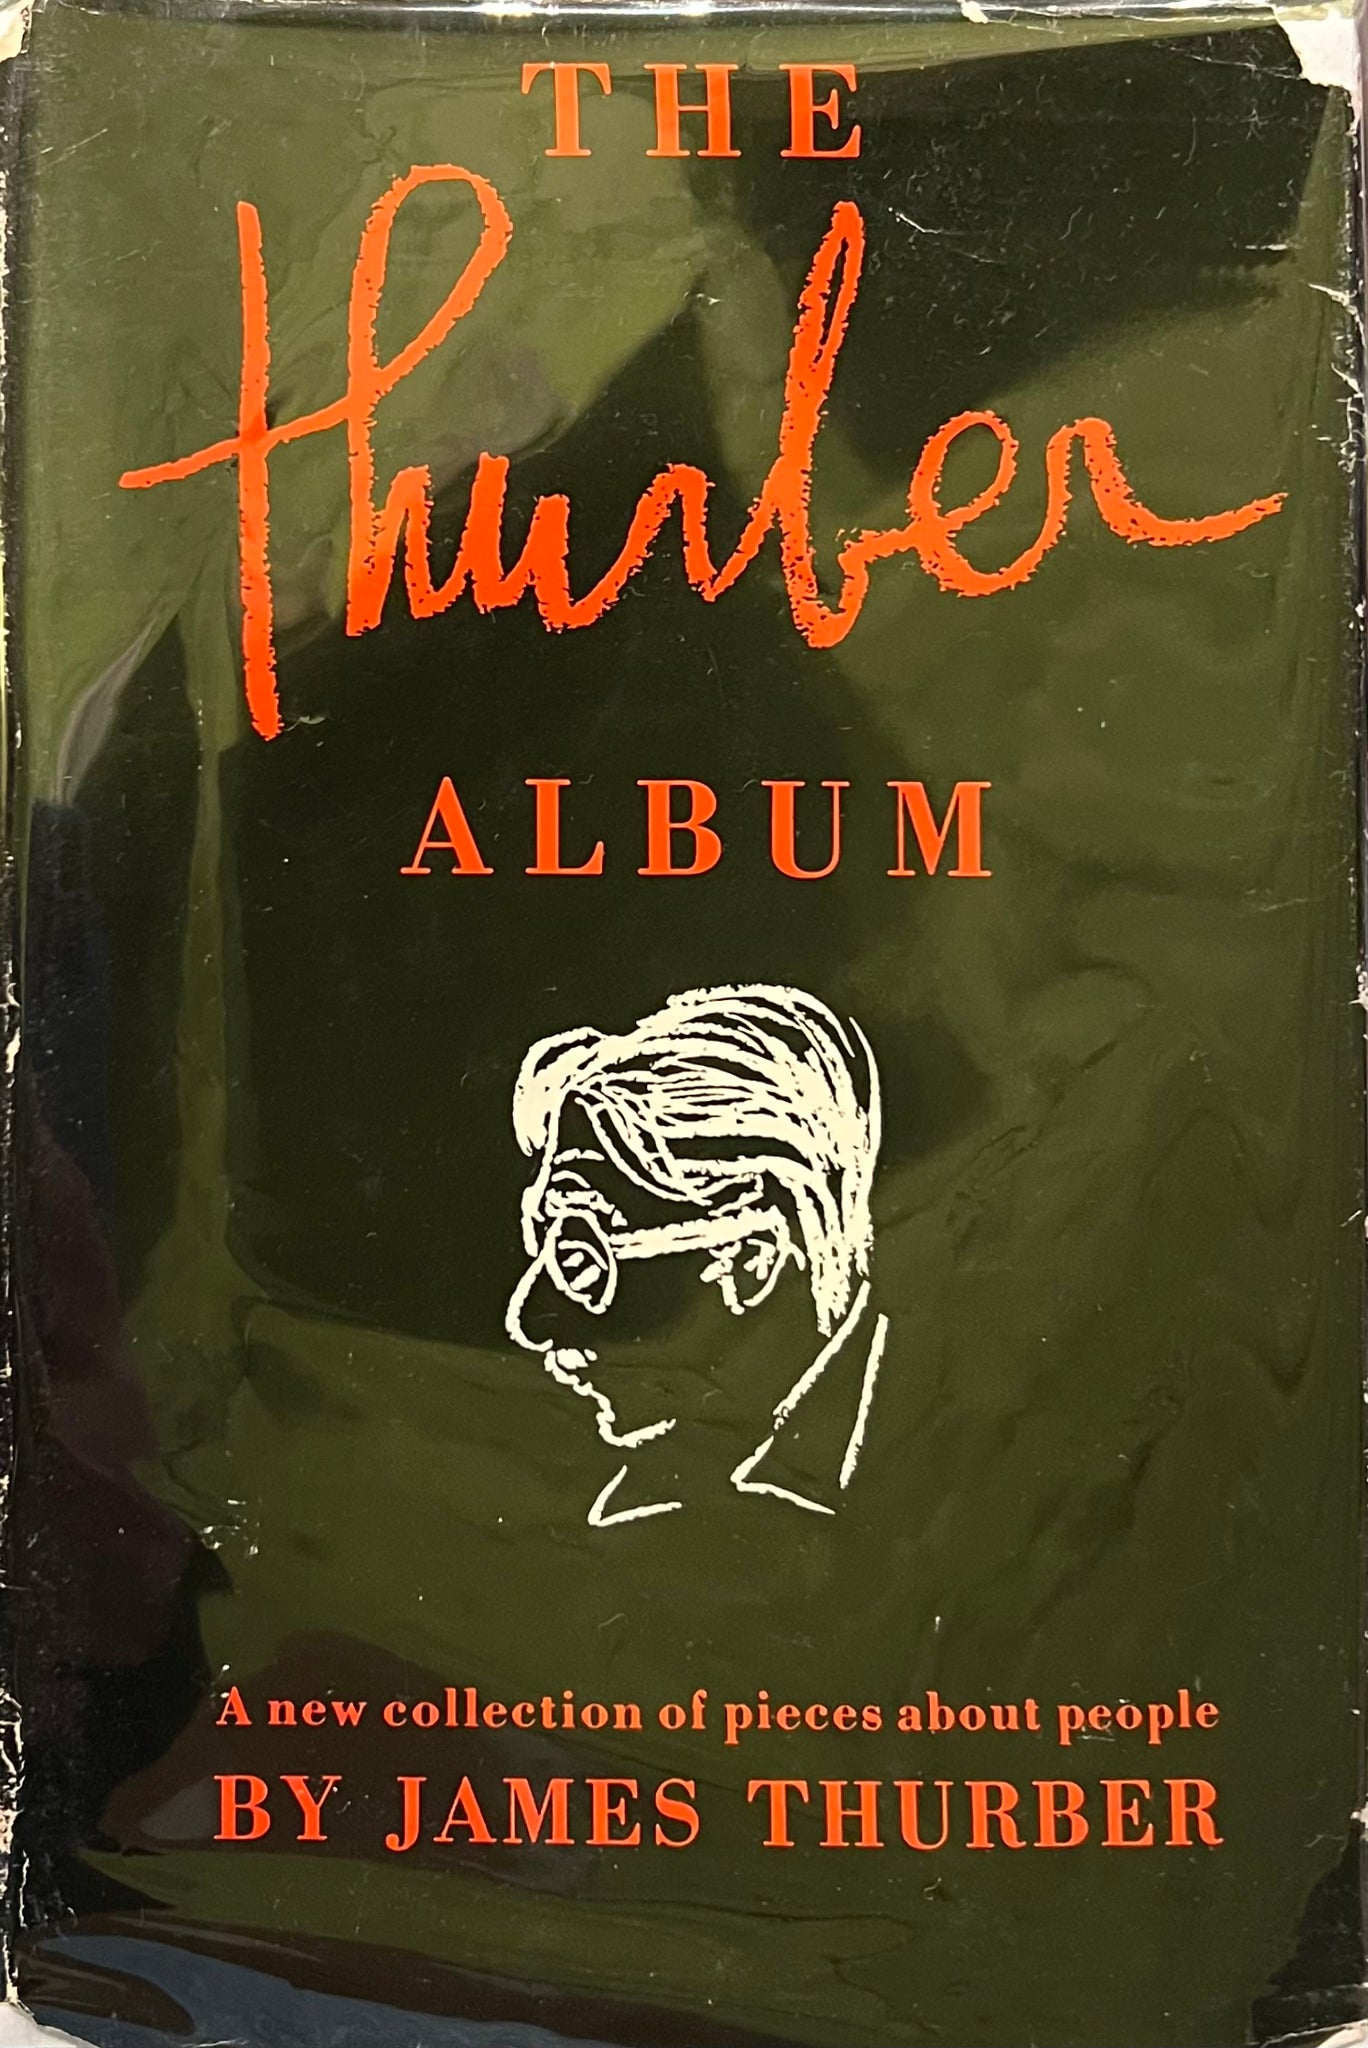 The Thurber Album: A New Collection of Pieces About People, James Thur –  Pillow-Cat Books